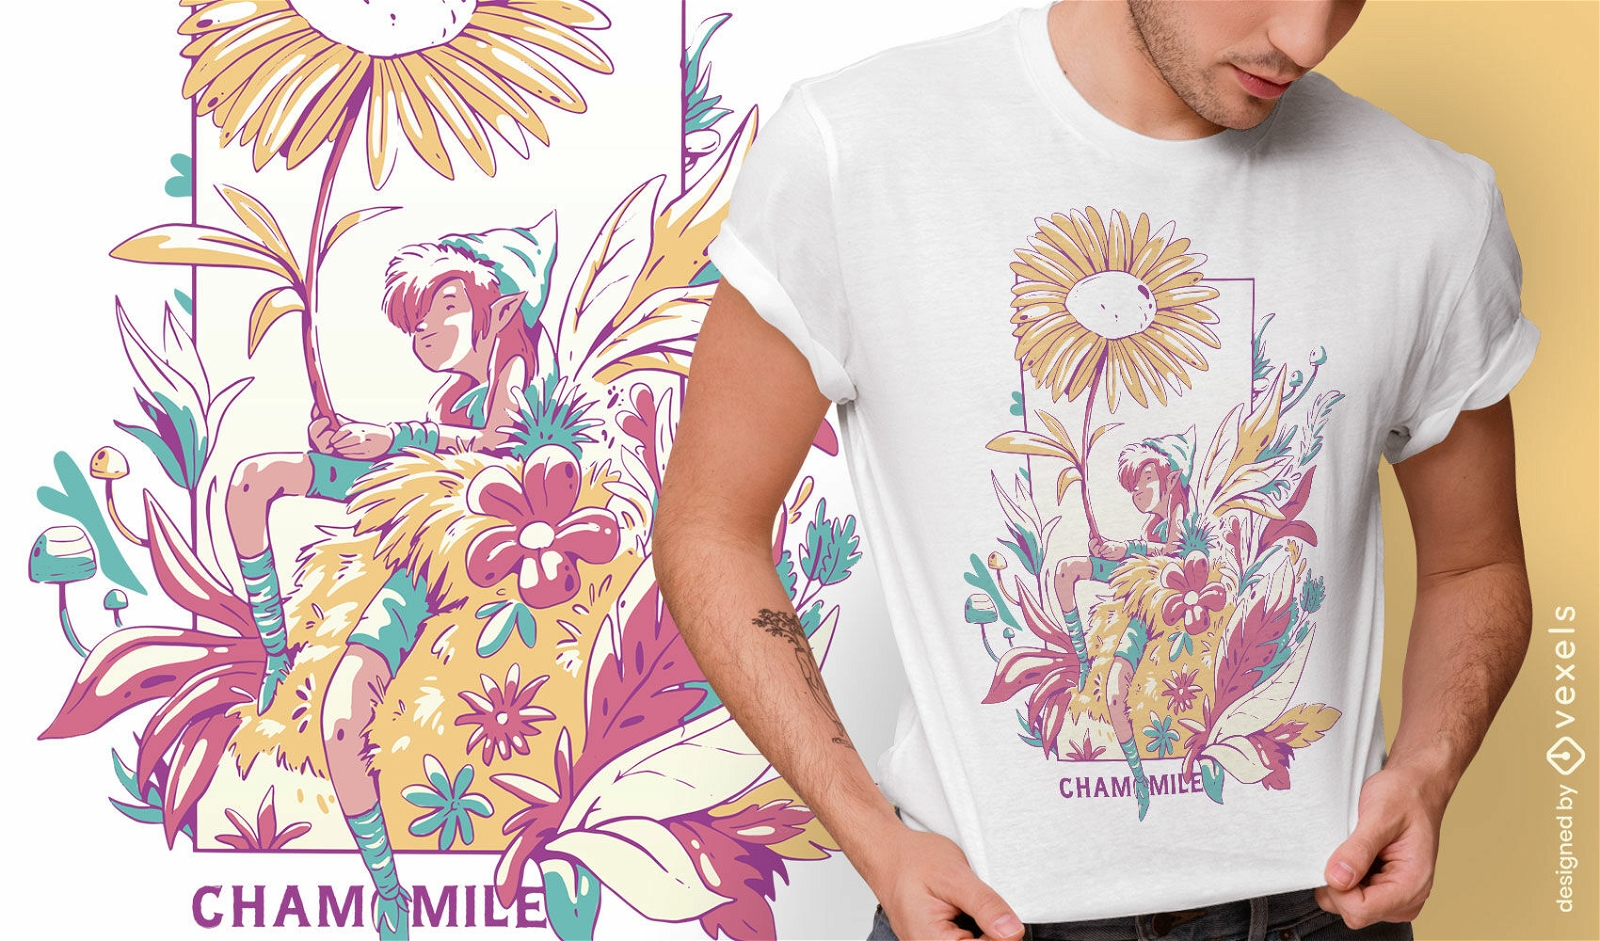 T-shirt design with wild flowers, PNG file.